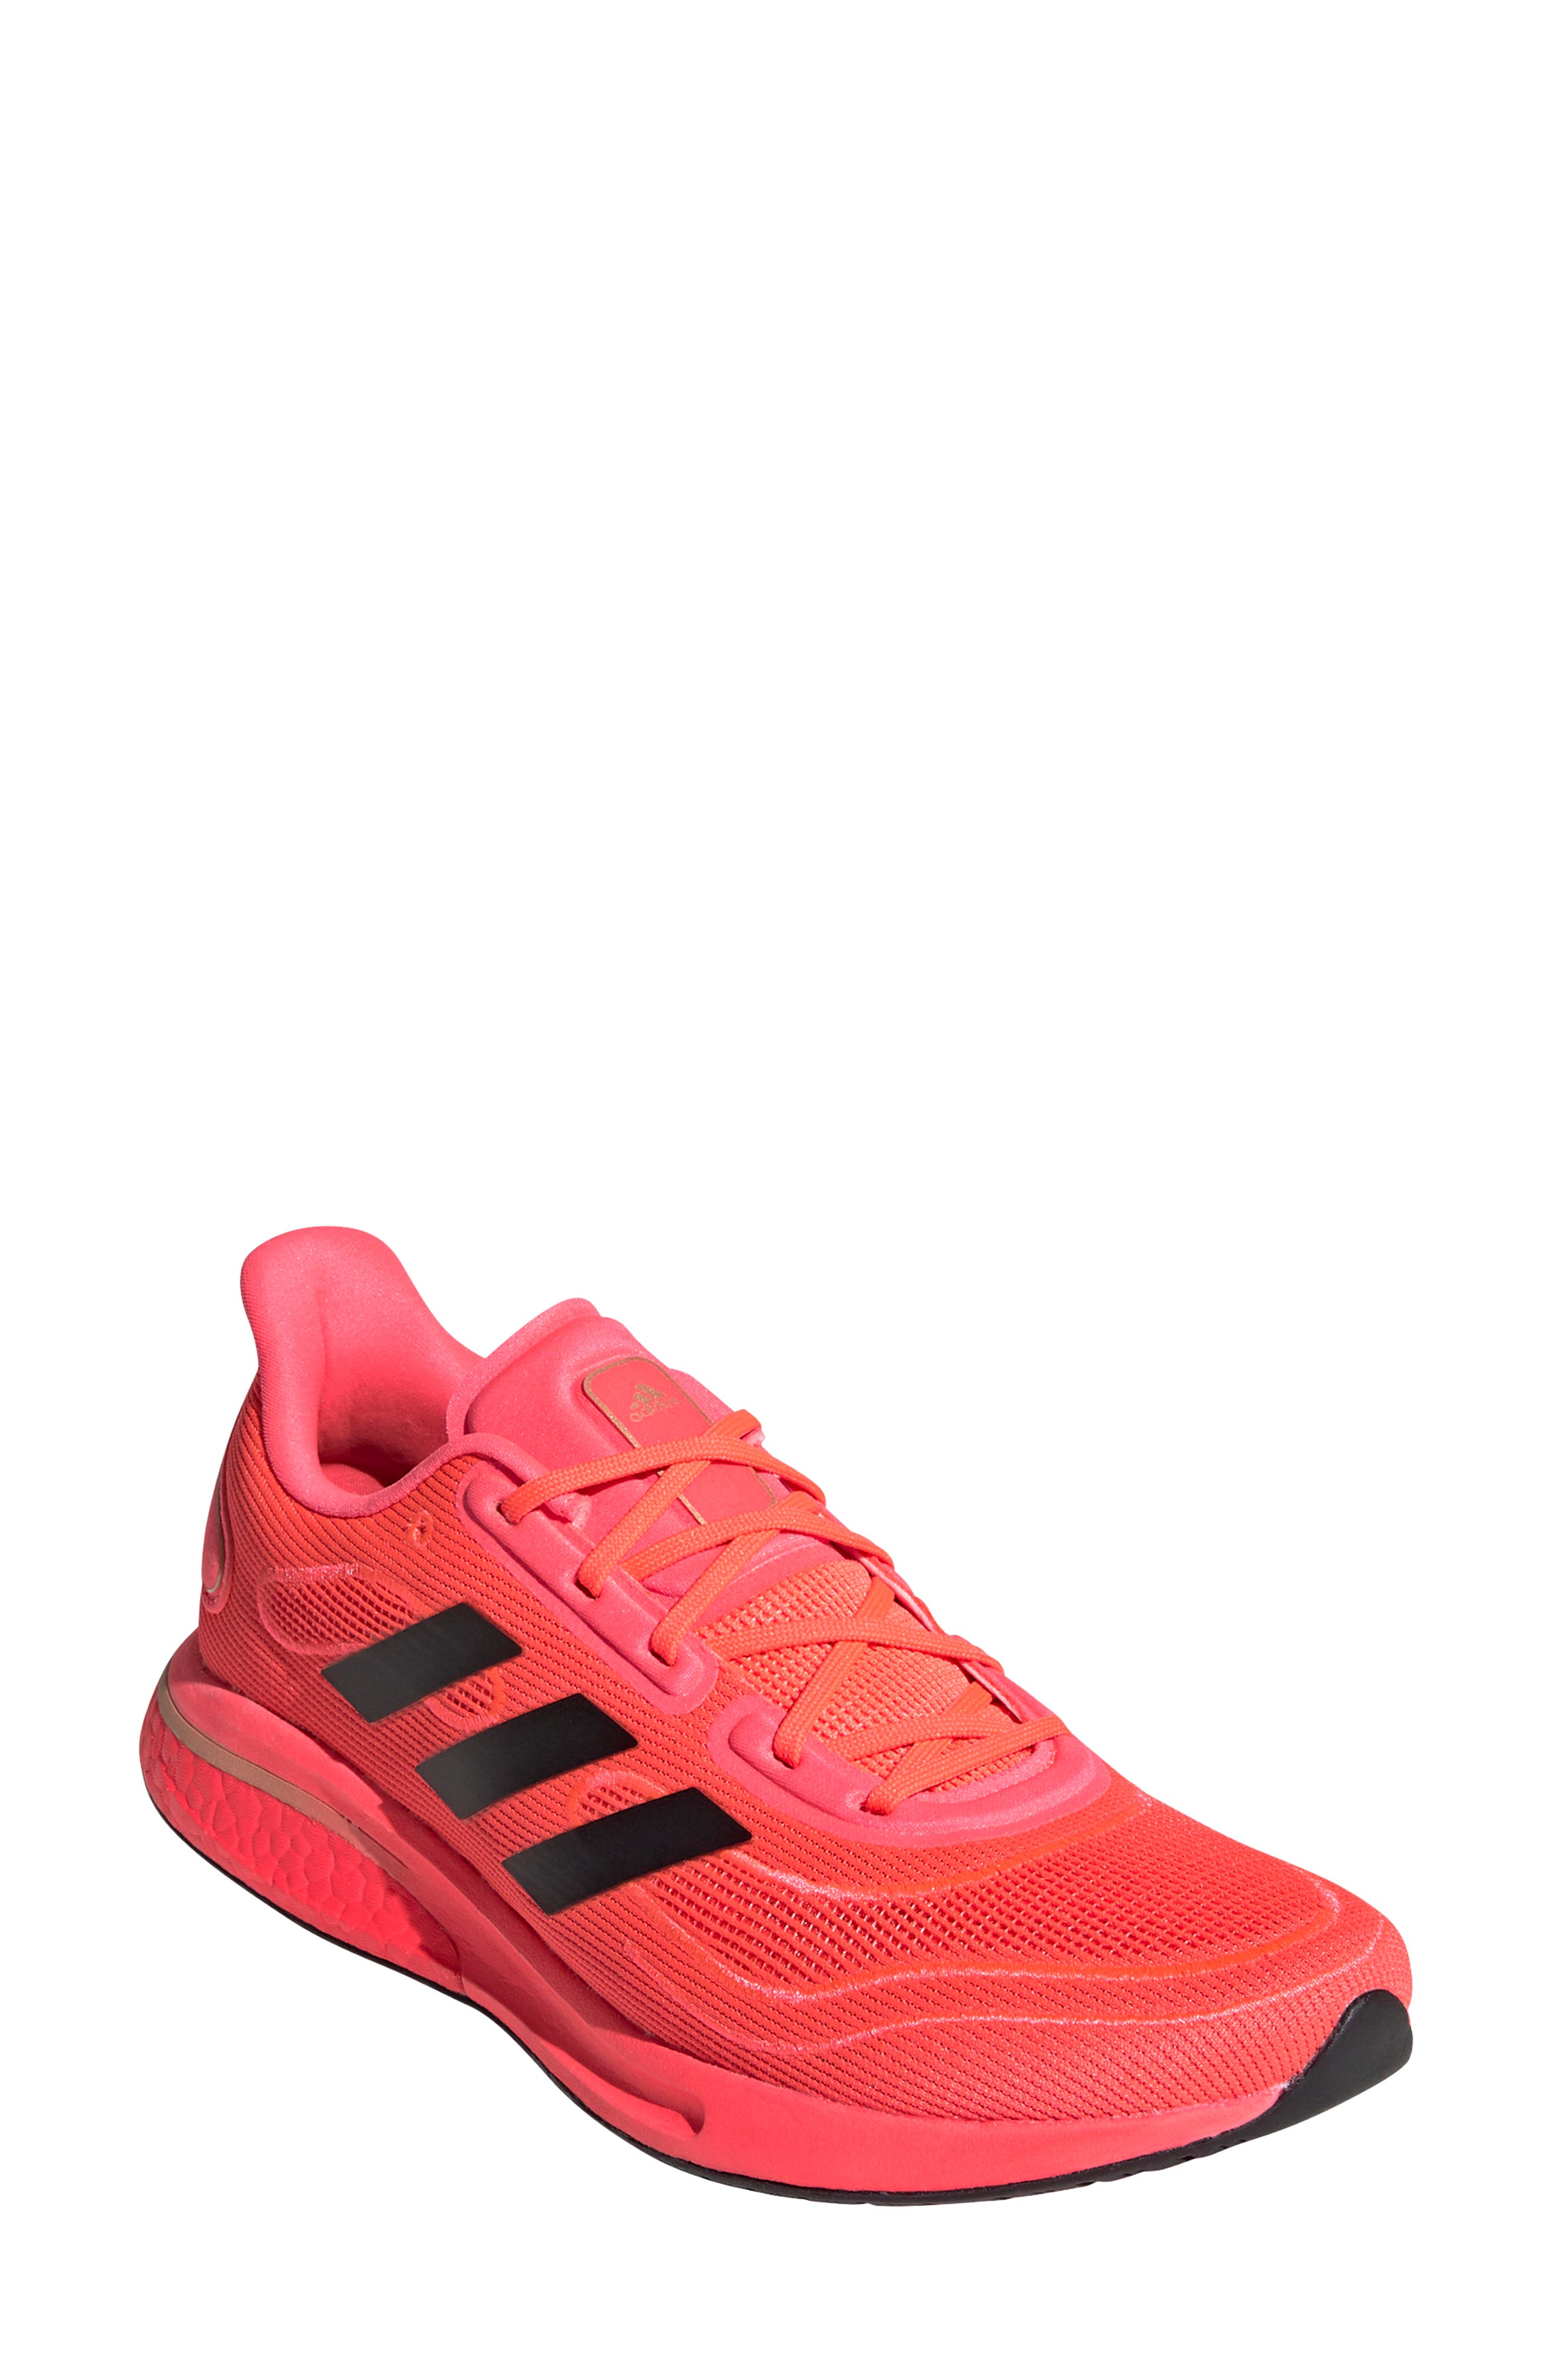 mens pink tennis shoes